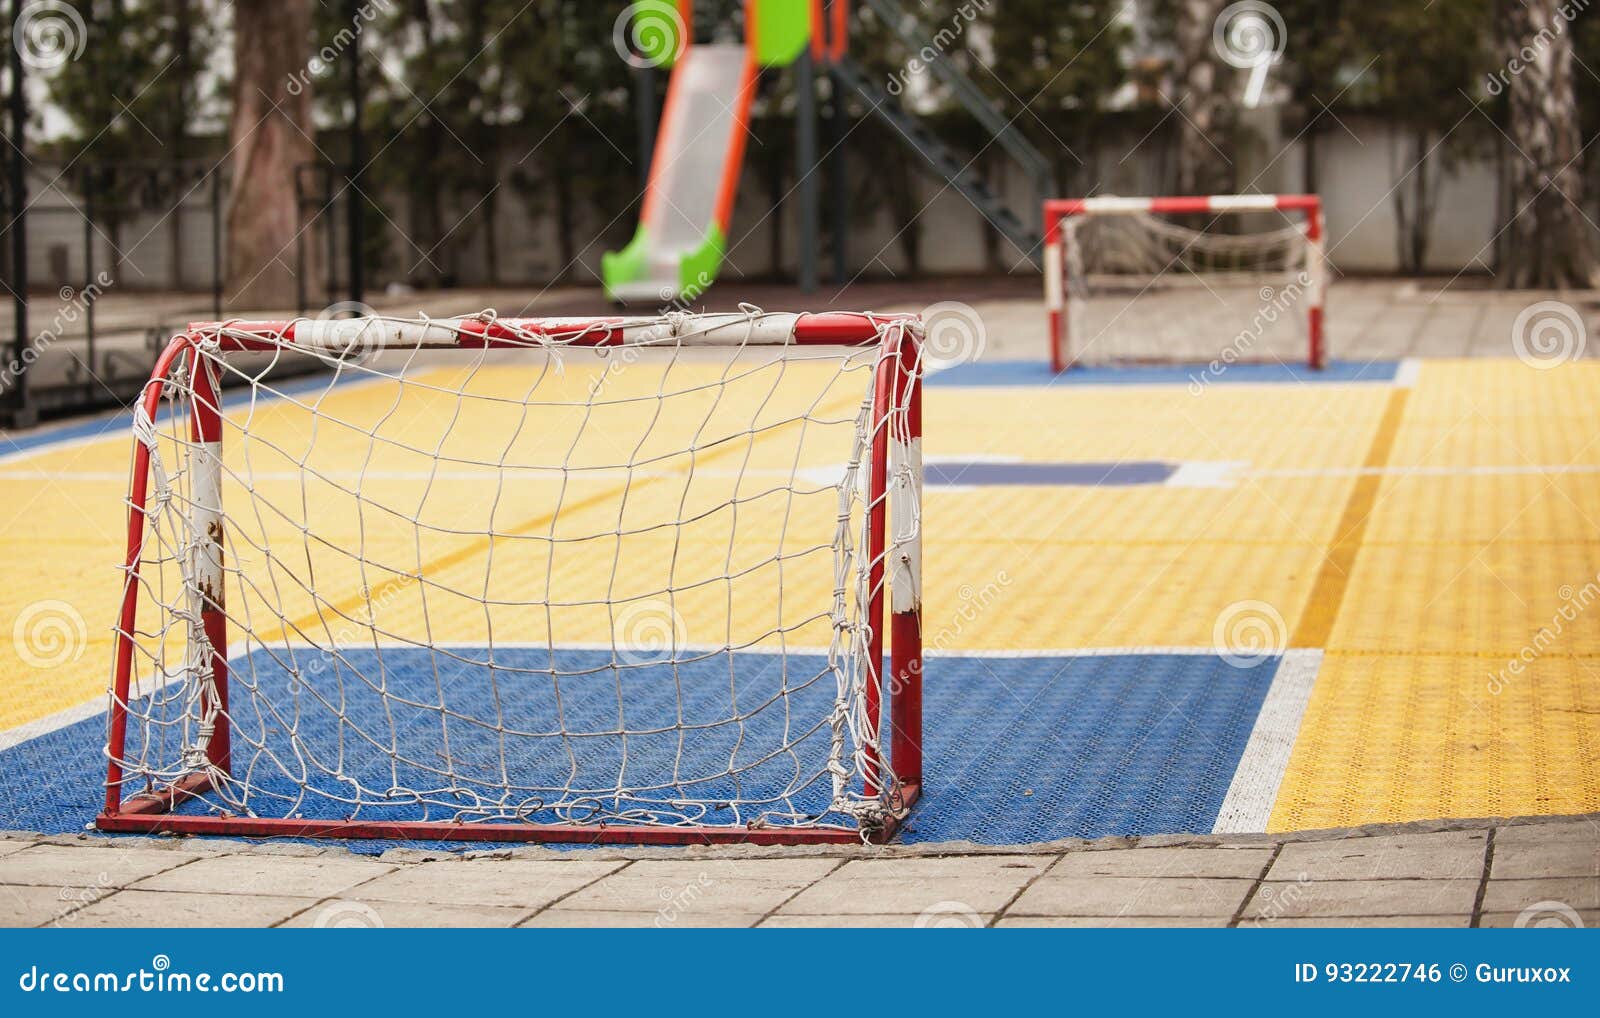 Small Soccer Field With Football Goal On Children ...